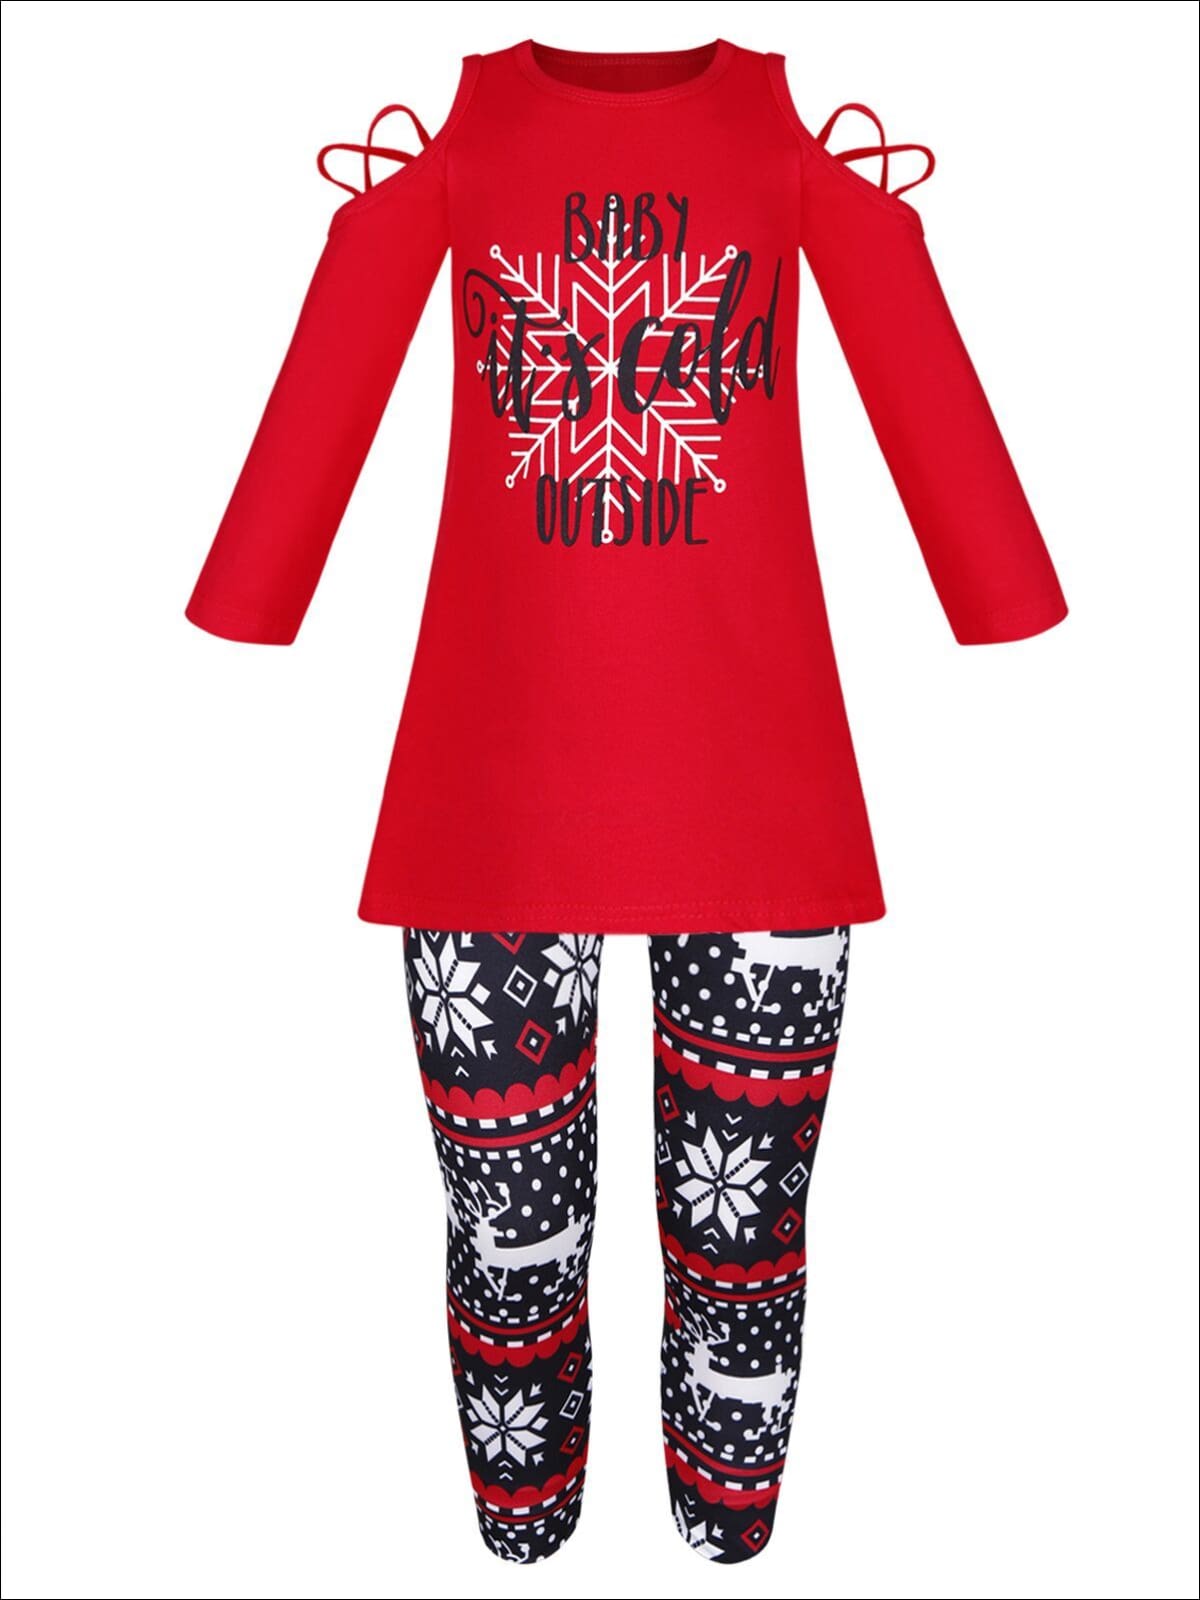 Girls Baby its Cold Outside Cold Shoulder Long Sleeve Top & Reindeer Print Leggings Set - Red & Black / 2T - Girls Fall Casual Set